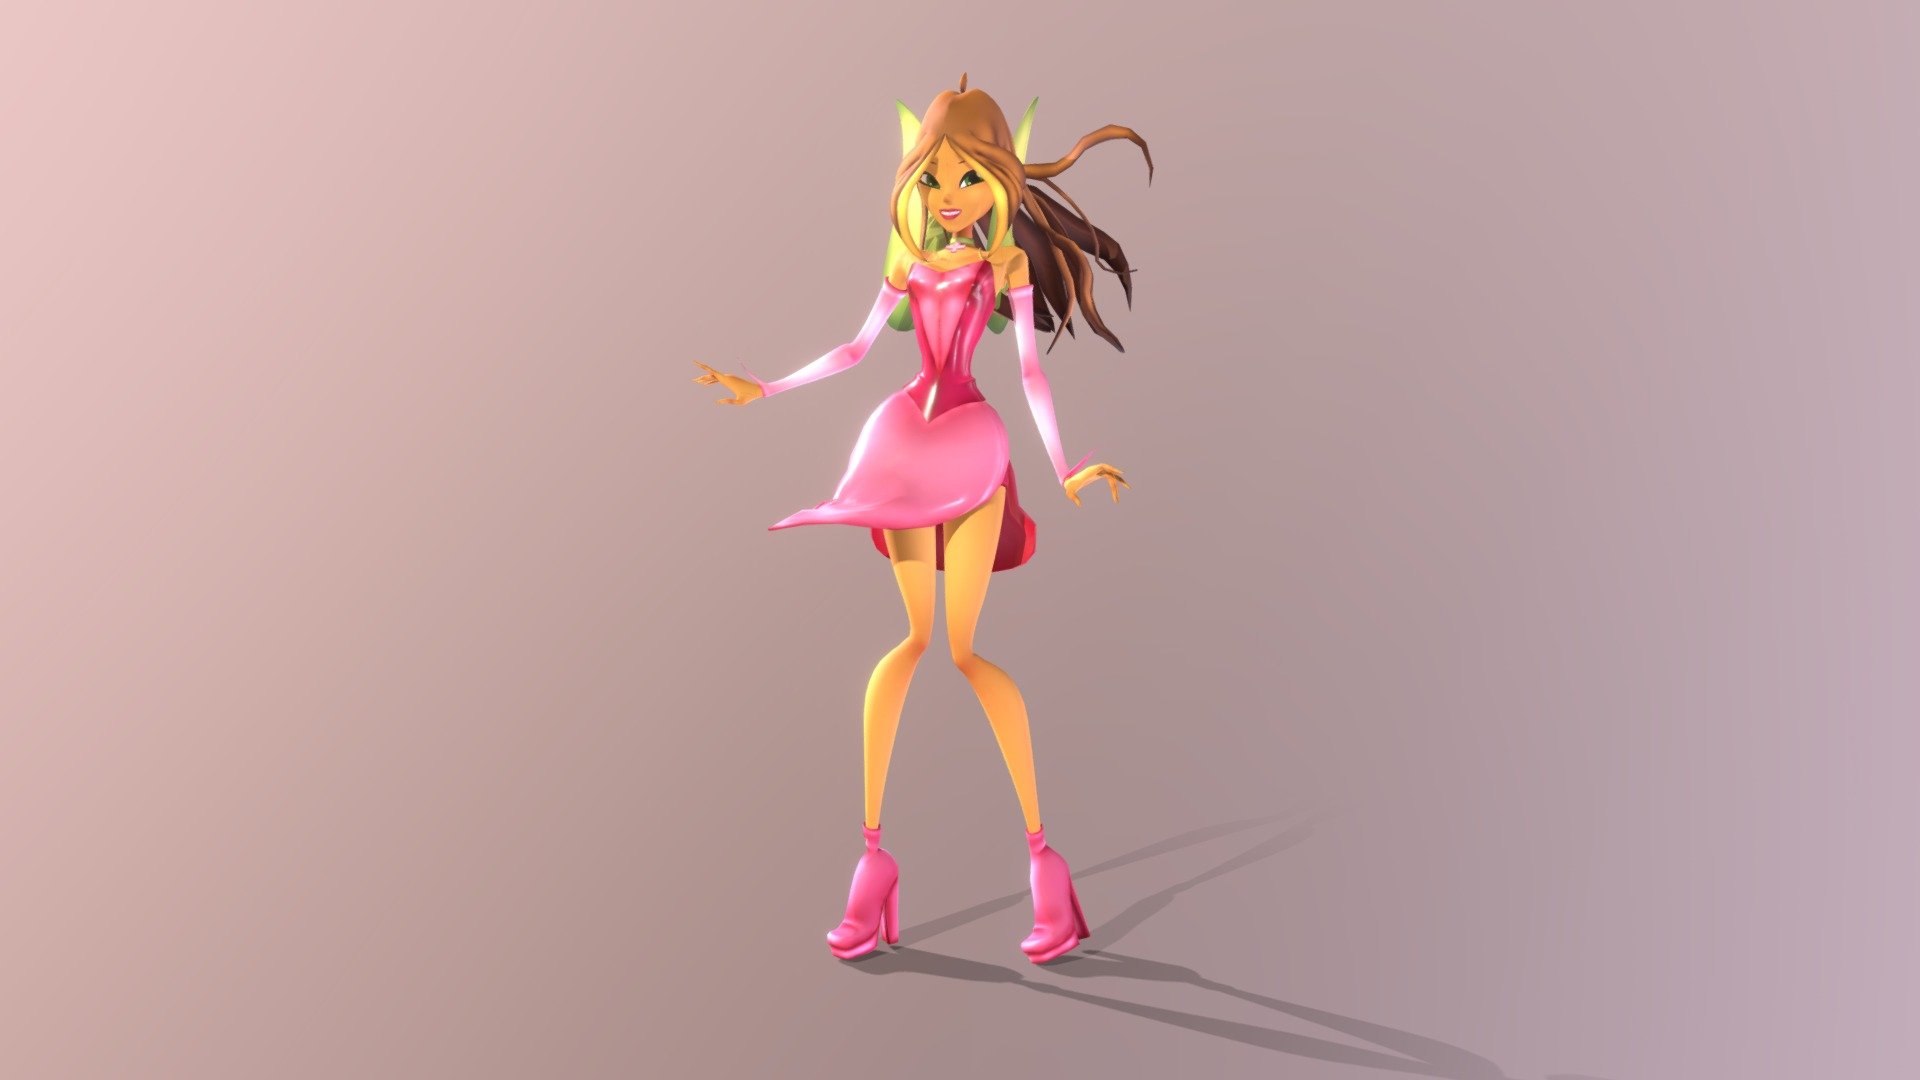 Please change to HD Textures!
A Model of Flora from Winx Club I made for use in MMD AnimationSoftware~

The download can be foundon my DeviantArt.

Please make sure if you plan to use her, to read and follow the rules. This is a free download and all I want in return.

Original Model: Apps Ministry LLC

Model Rip: 0-0-alice-0-0

Flora modeling: McChipy

Pmx editing: McChipy - Flora (Magic Winx) - 3D model by McChipy 3d model